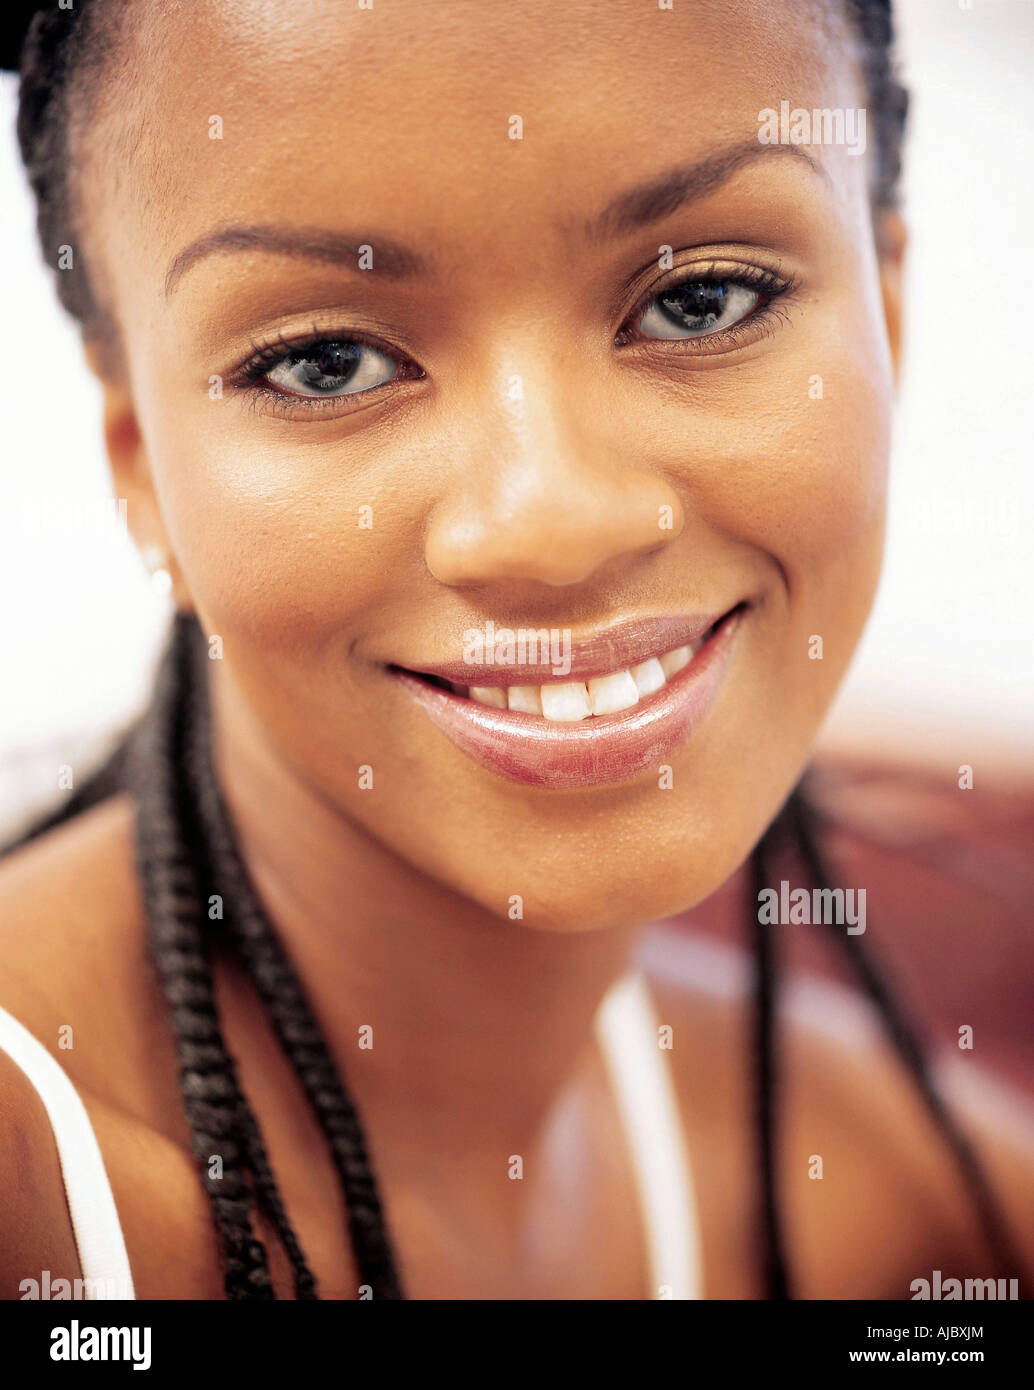 Portrait of a Young African Woman Stock Photo